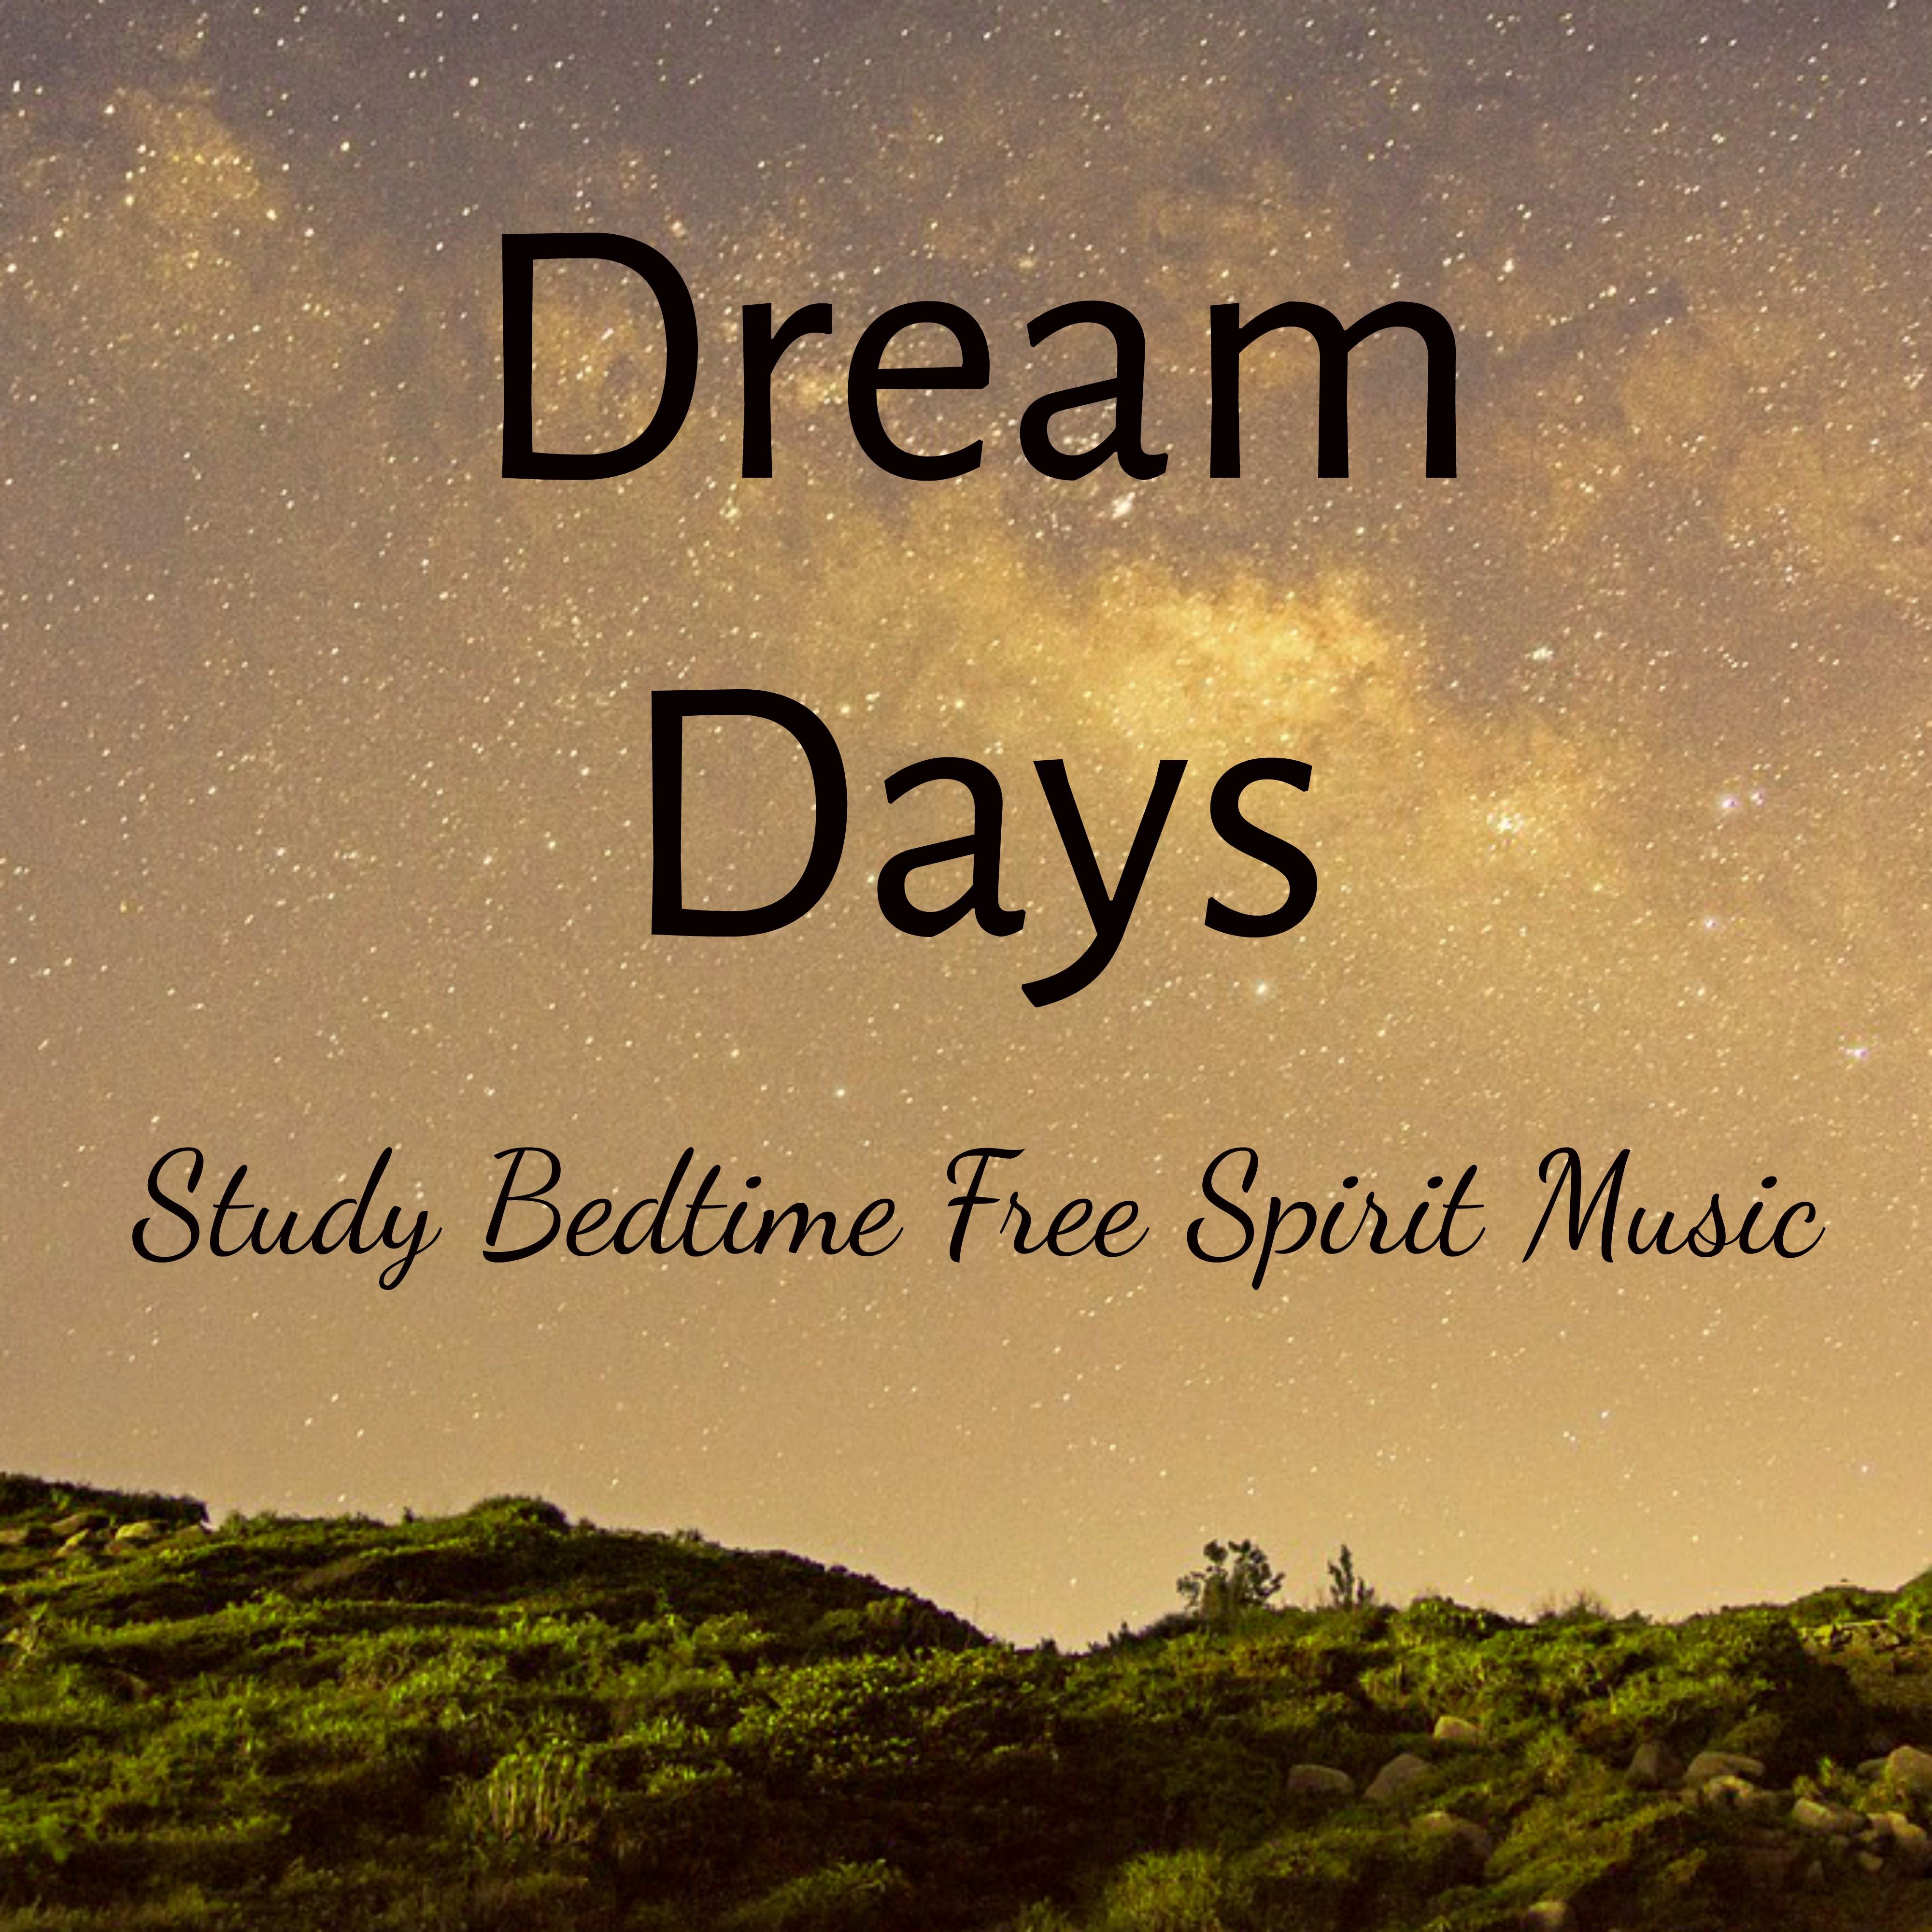 Dream Days - Study Bedtime Free Spirit Music for Deep Relaxation Focus Group Healing Massage with Soothing Binaural Instrumental Nature Sounds